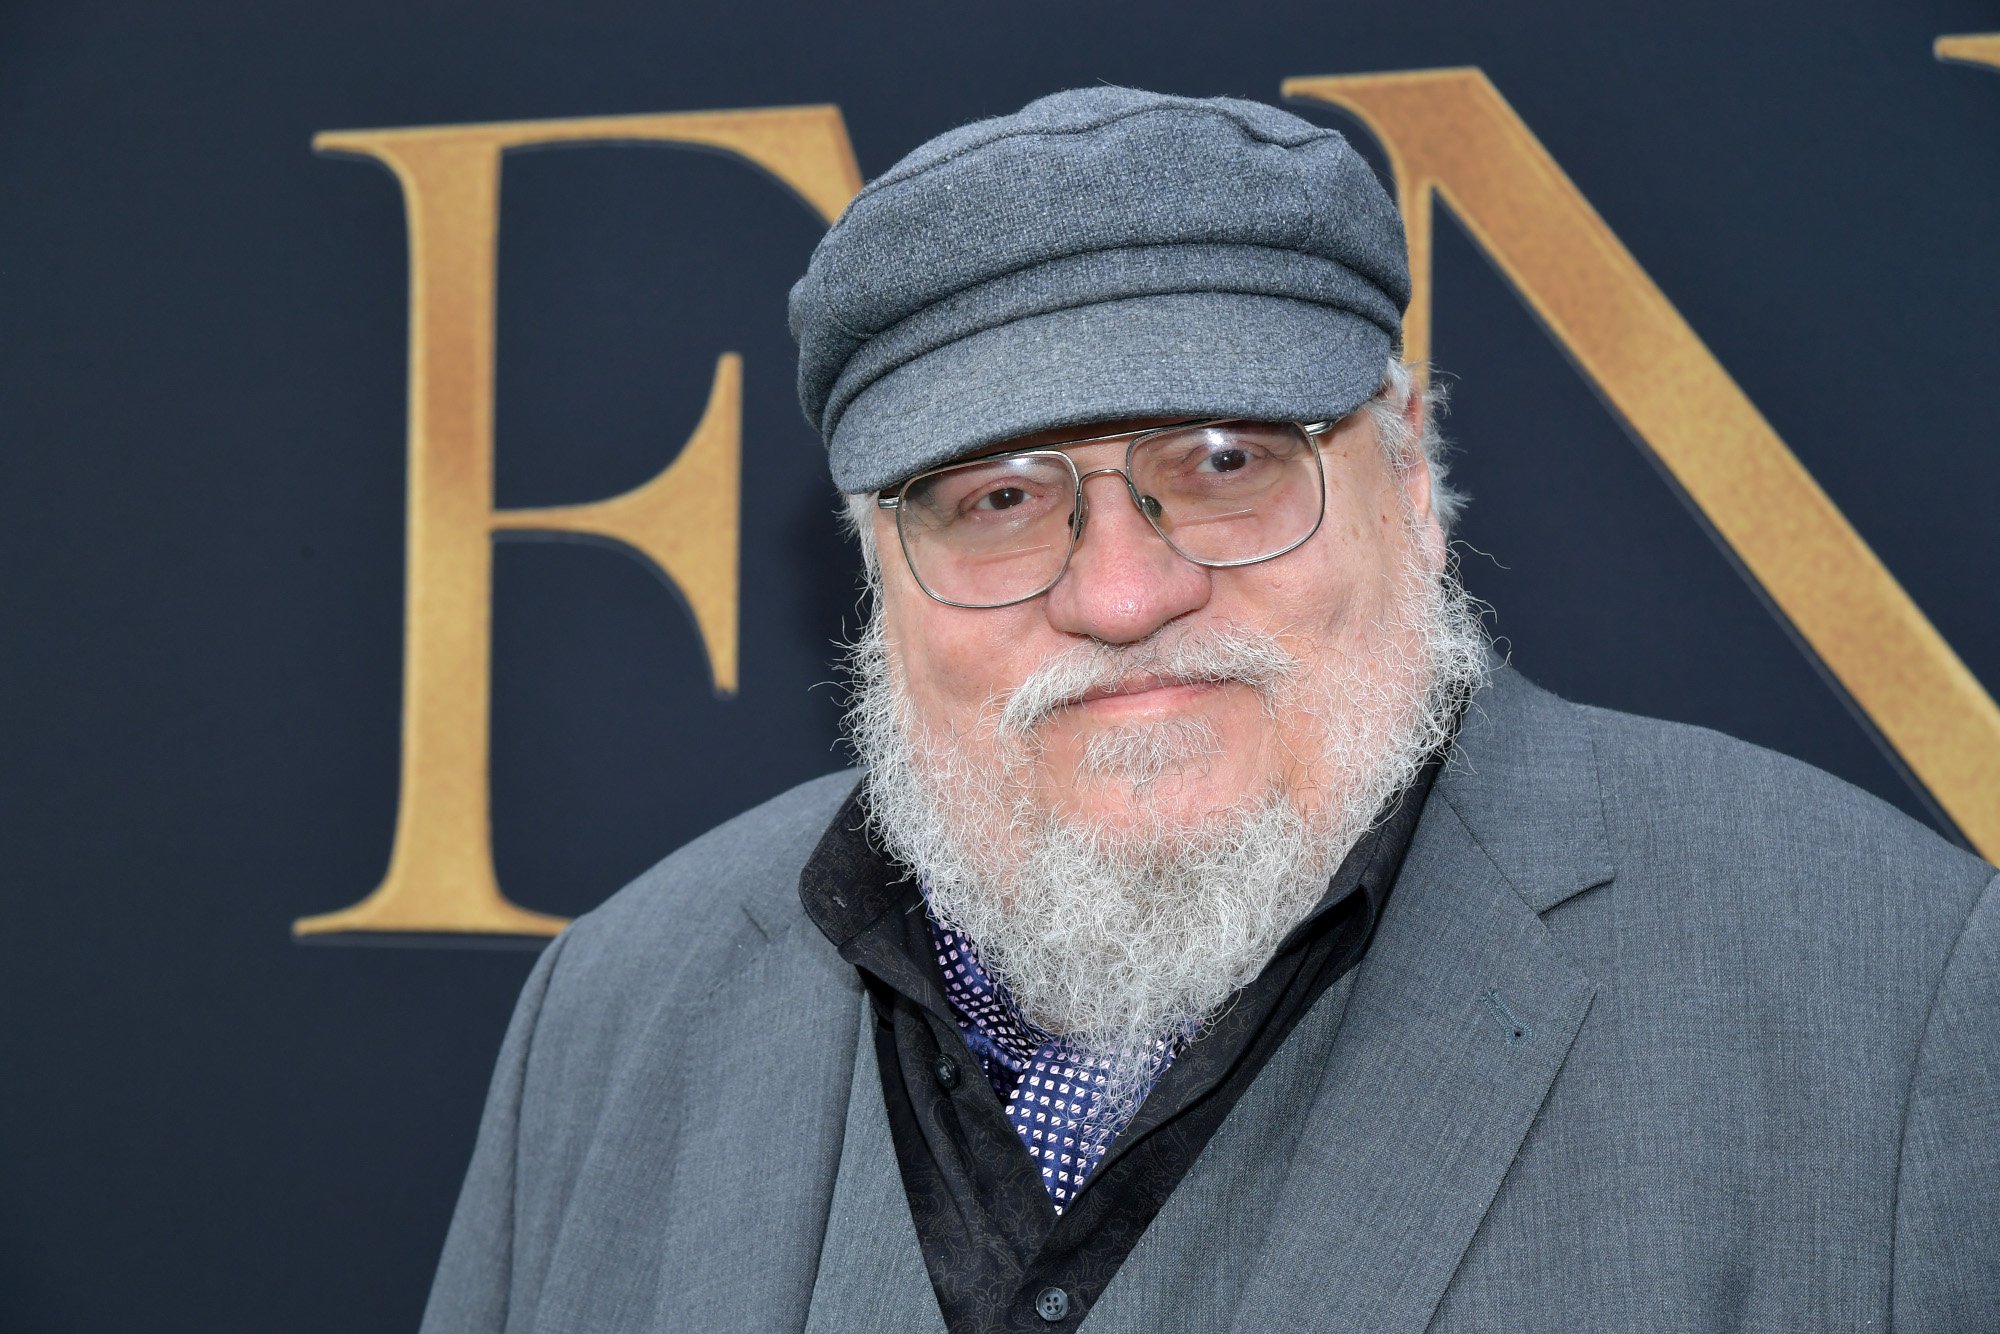 George R.R. Martin, who created the 'Game of Thrones' universe. He's wearing a grey jacket and grey hat, as well as glasses.